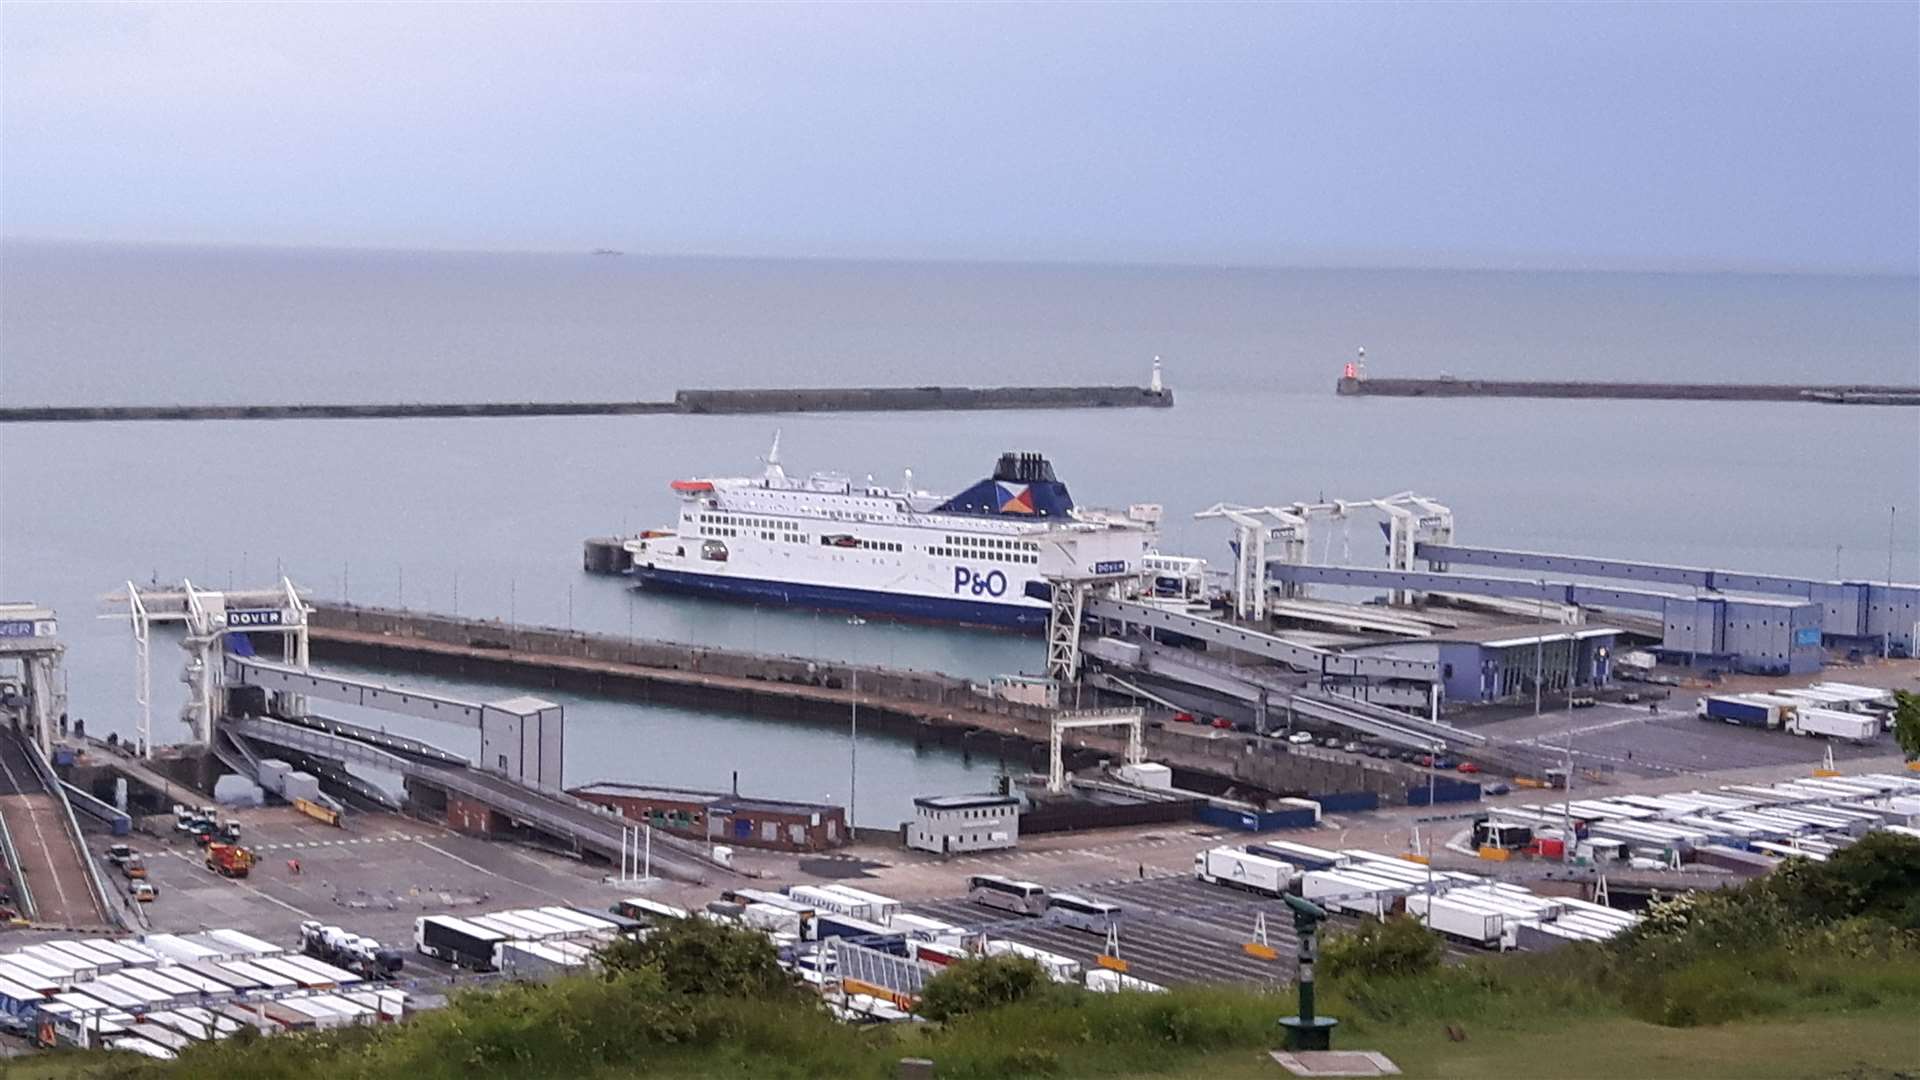 The Port of Dover has been a key trading link with Europe